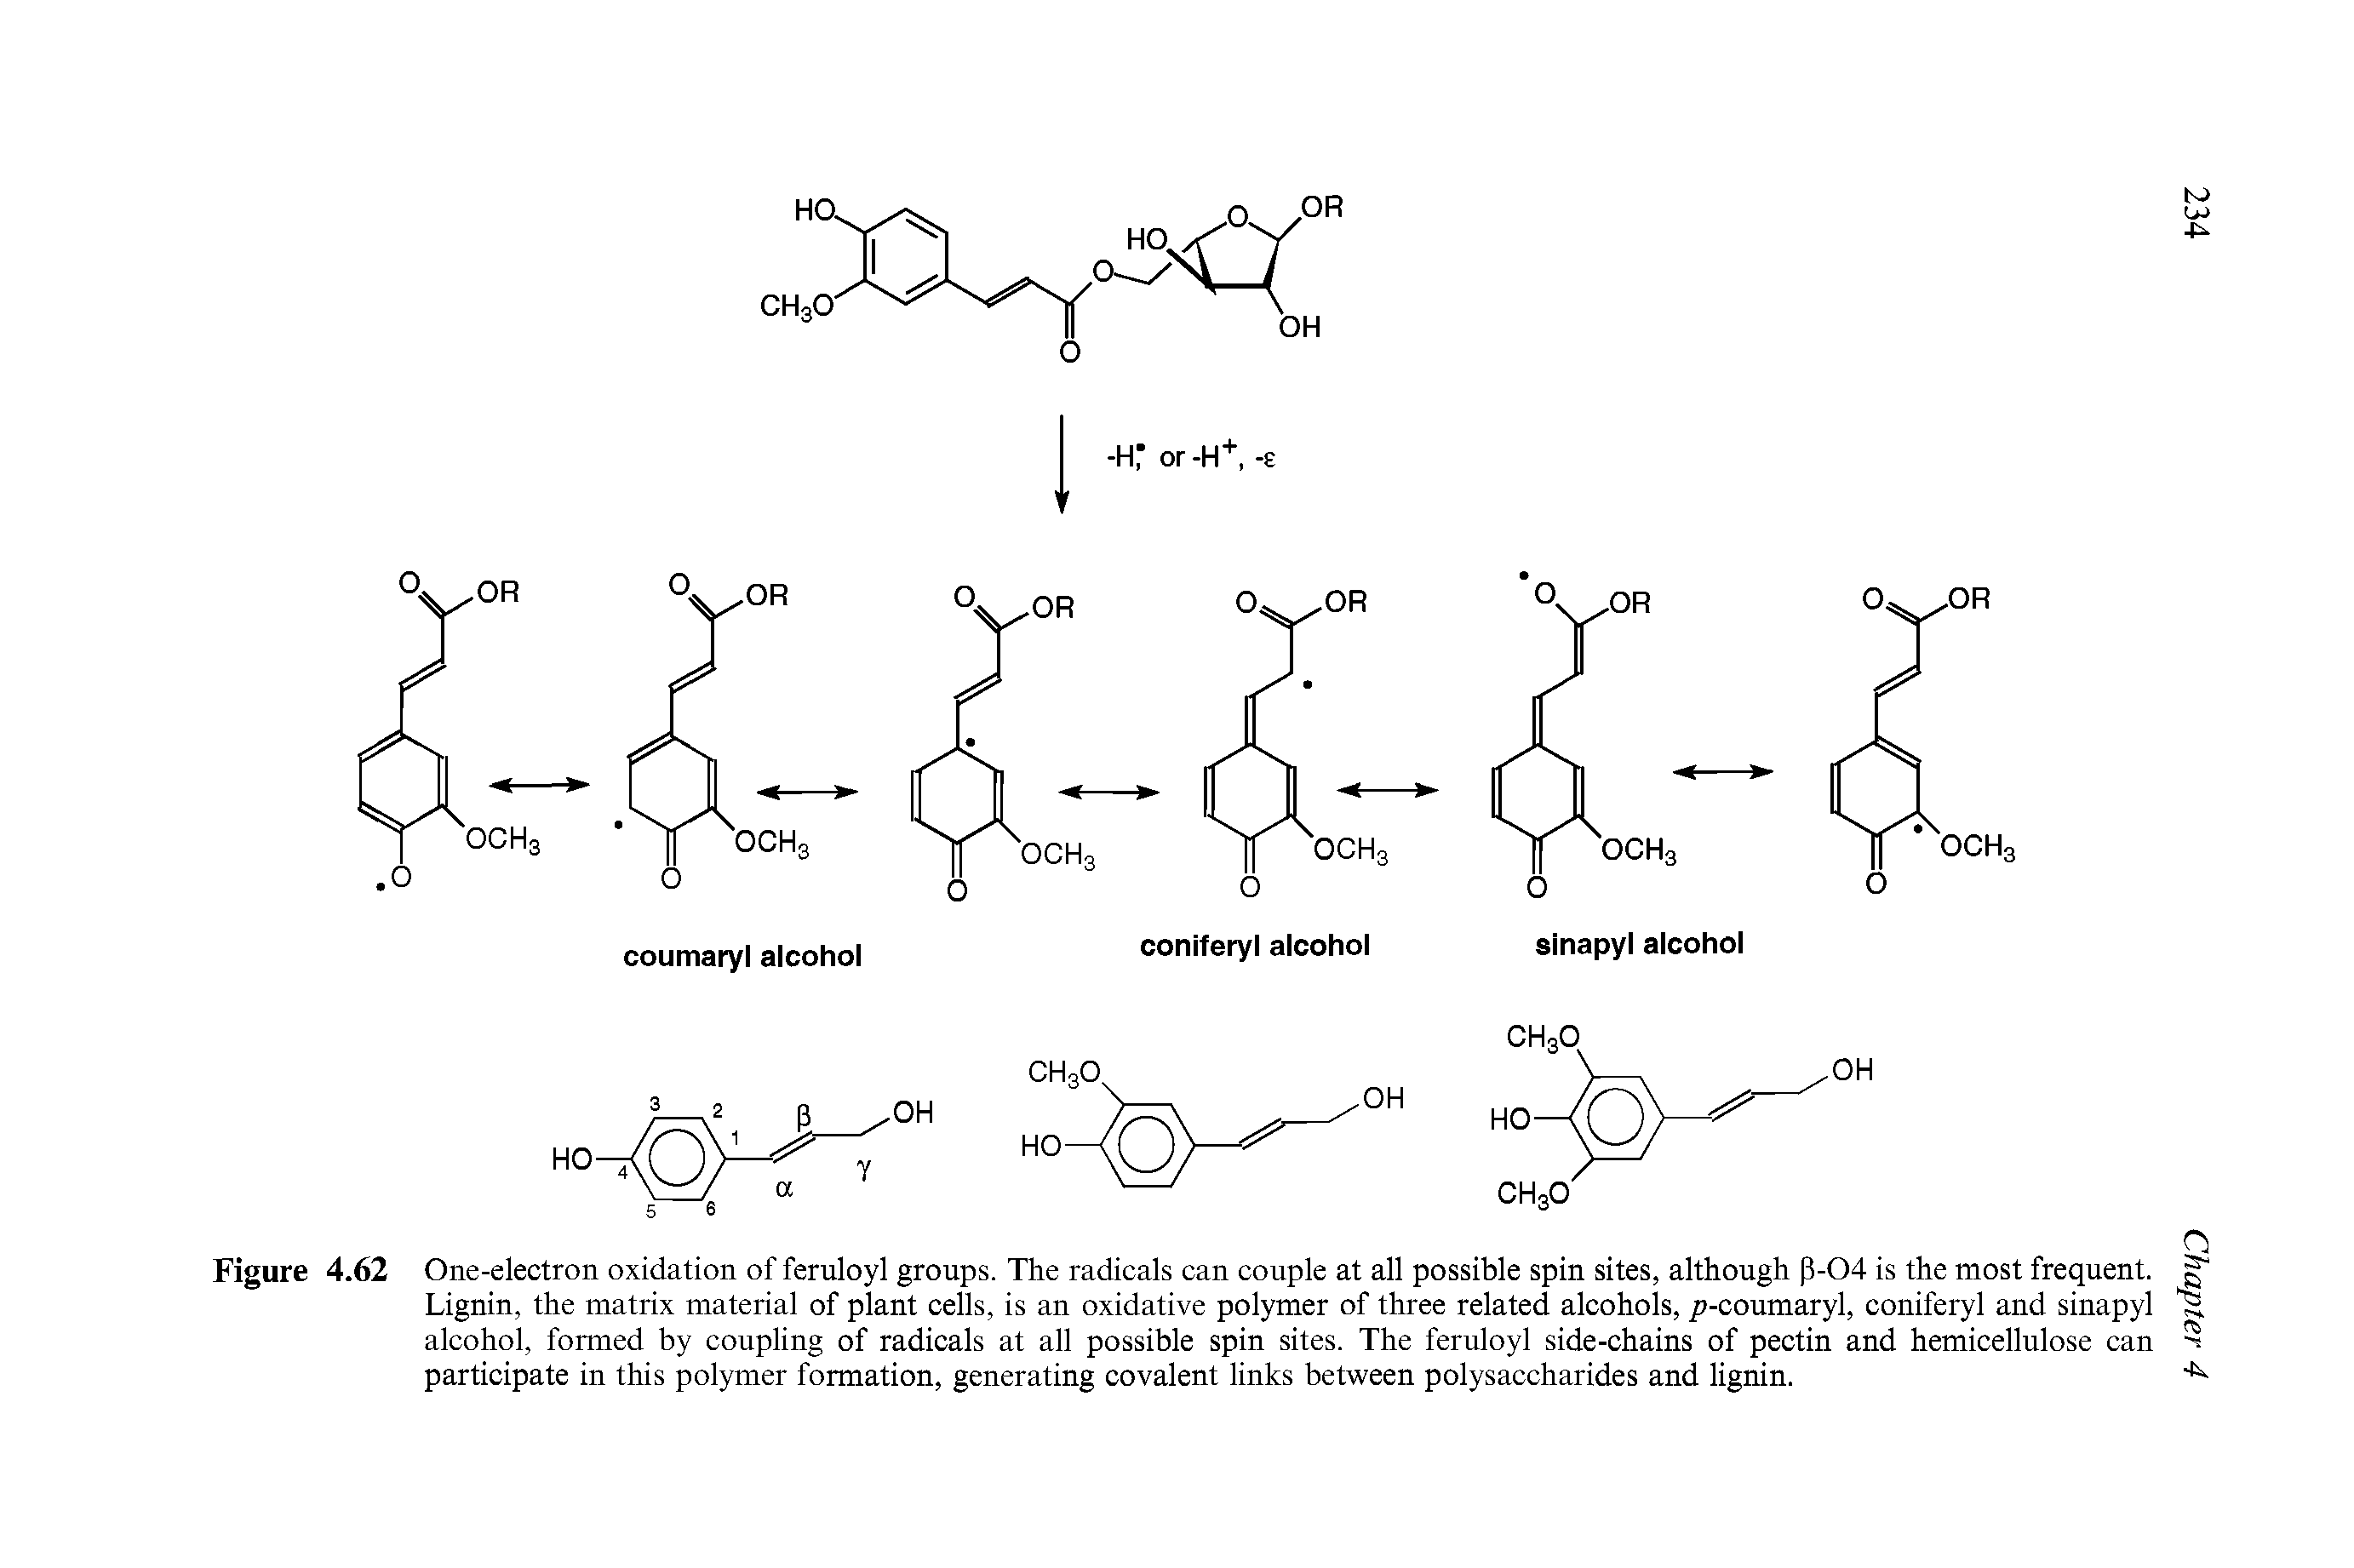 Figure 4.62 One-electron oxidation of feruloyl groups. The radicals can couple at all possible spin sites, although (3-04 is the most frequent, g Lignin, the matrix material of plant cells, is an oxidative polymer of three related alcohols, i-coumaryl, coniferyl and sinapyl alcohol, formed by coupling of radicals at all possible spin sites. The feruloyl side-chains of pectin and hemicellulose can participate in this polymer formation, generating covalent links between polysaccharides and lignin.